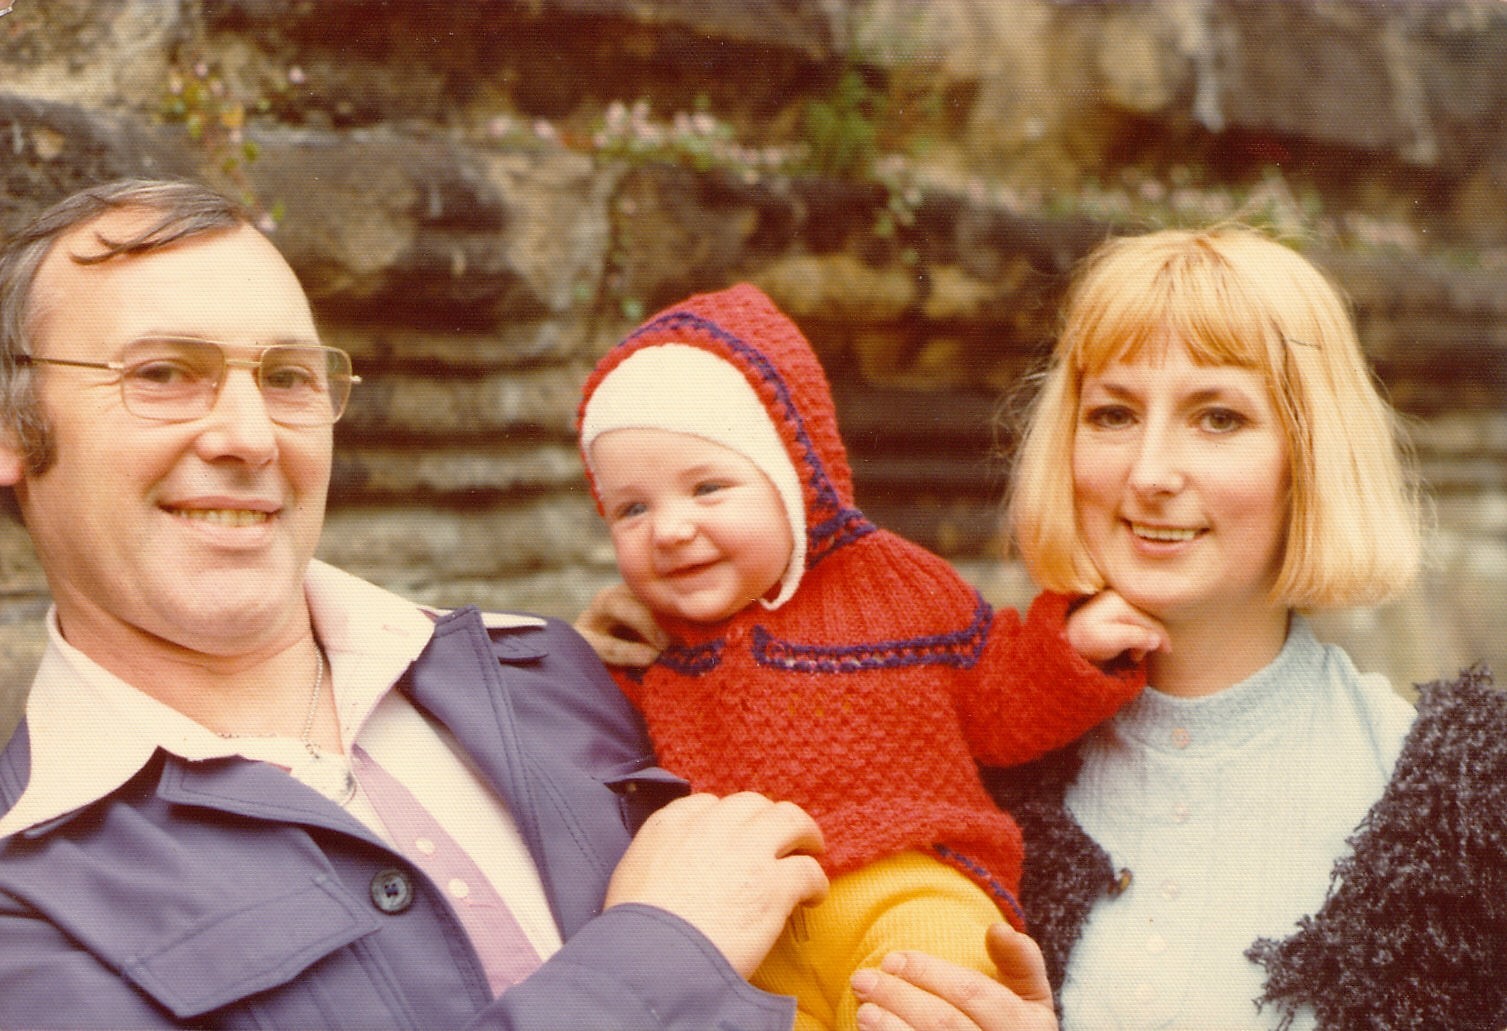 A younger Ted McDermott and wife, Linda, with their infant son Simon